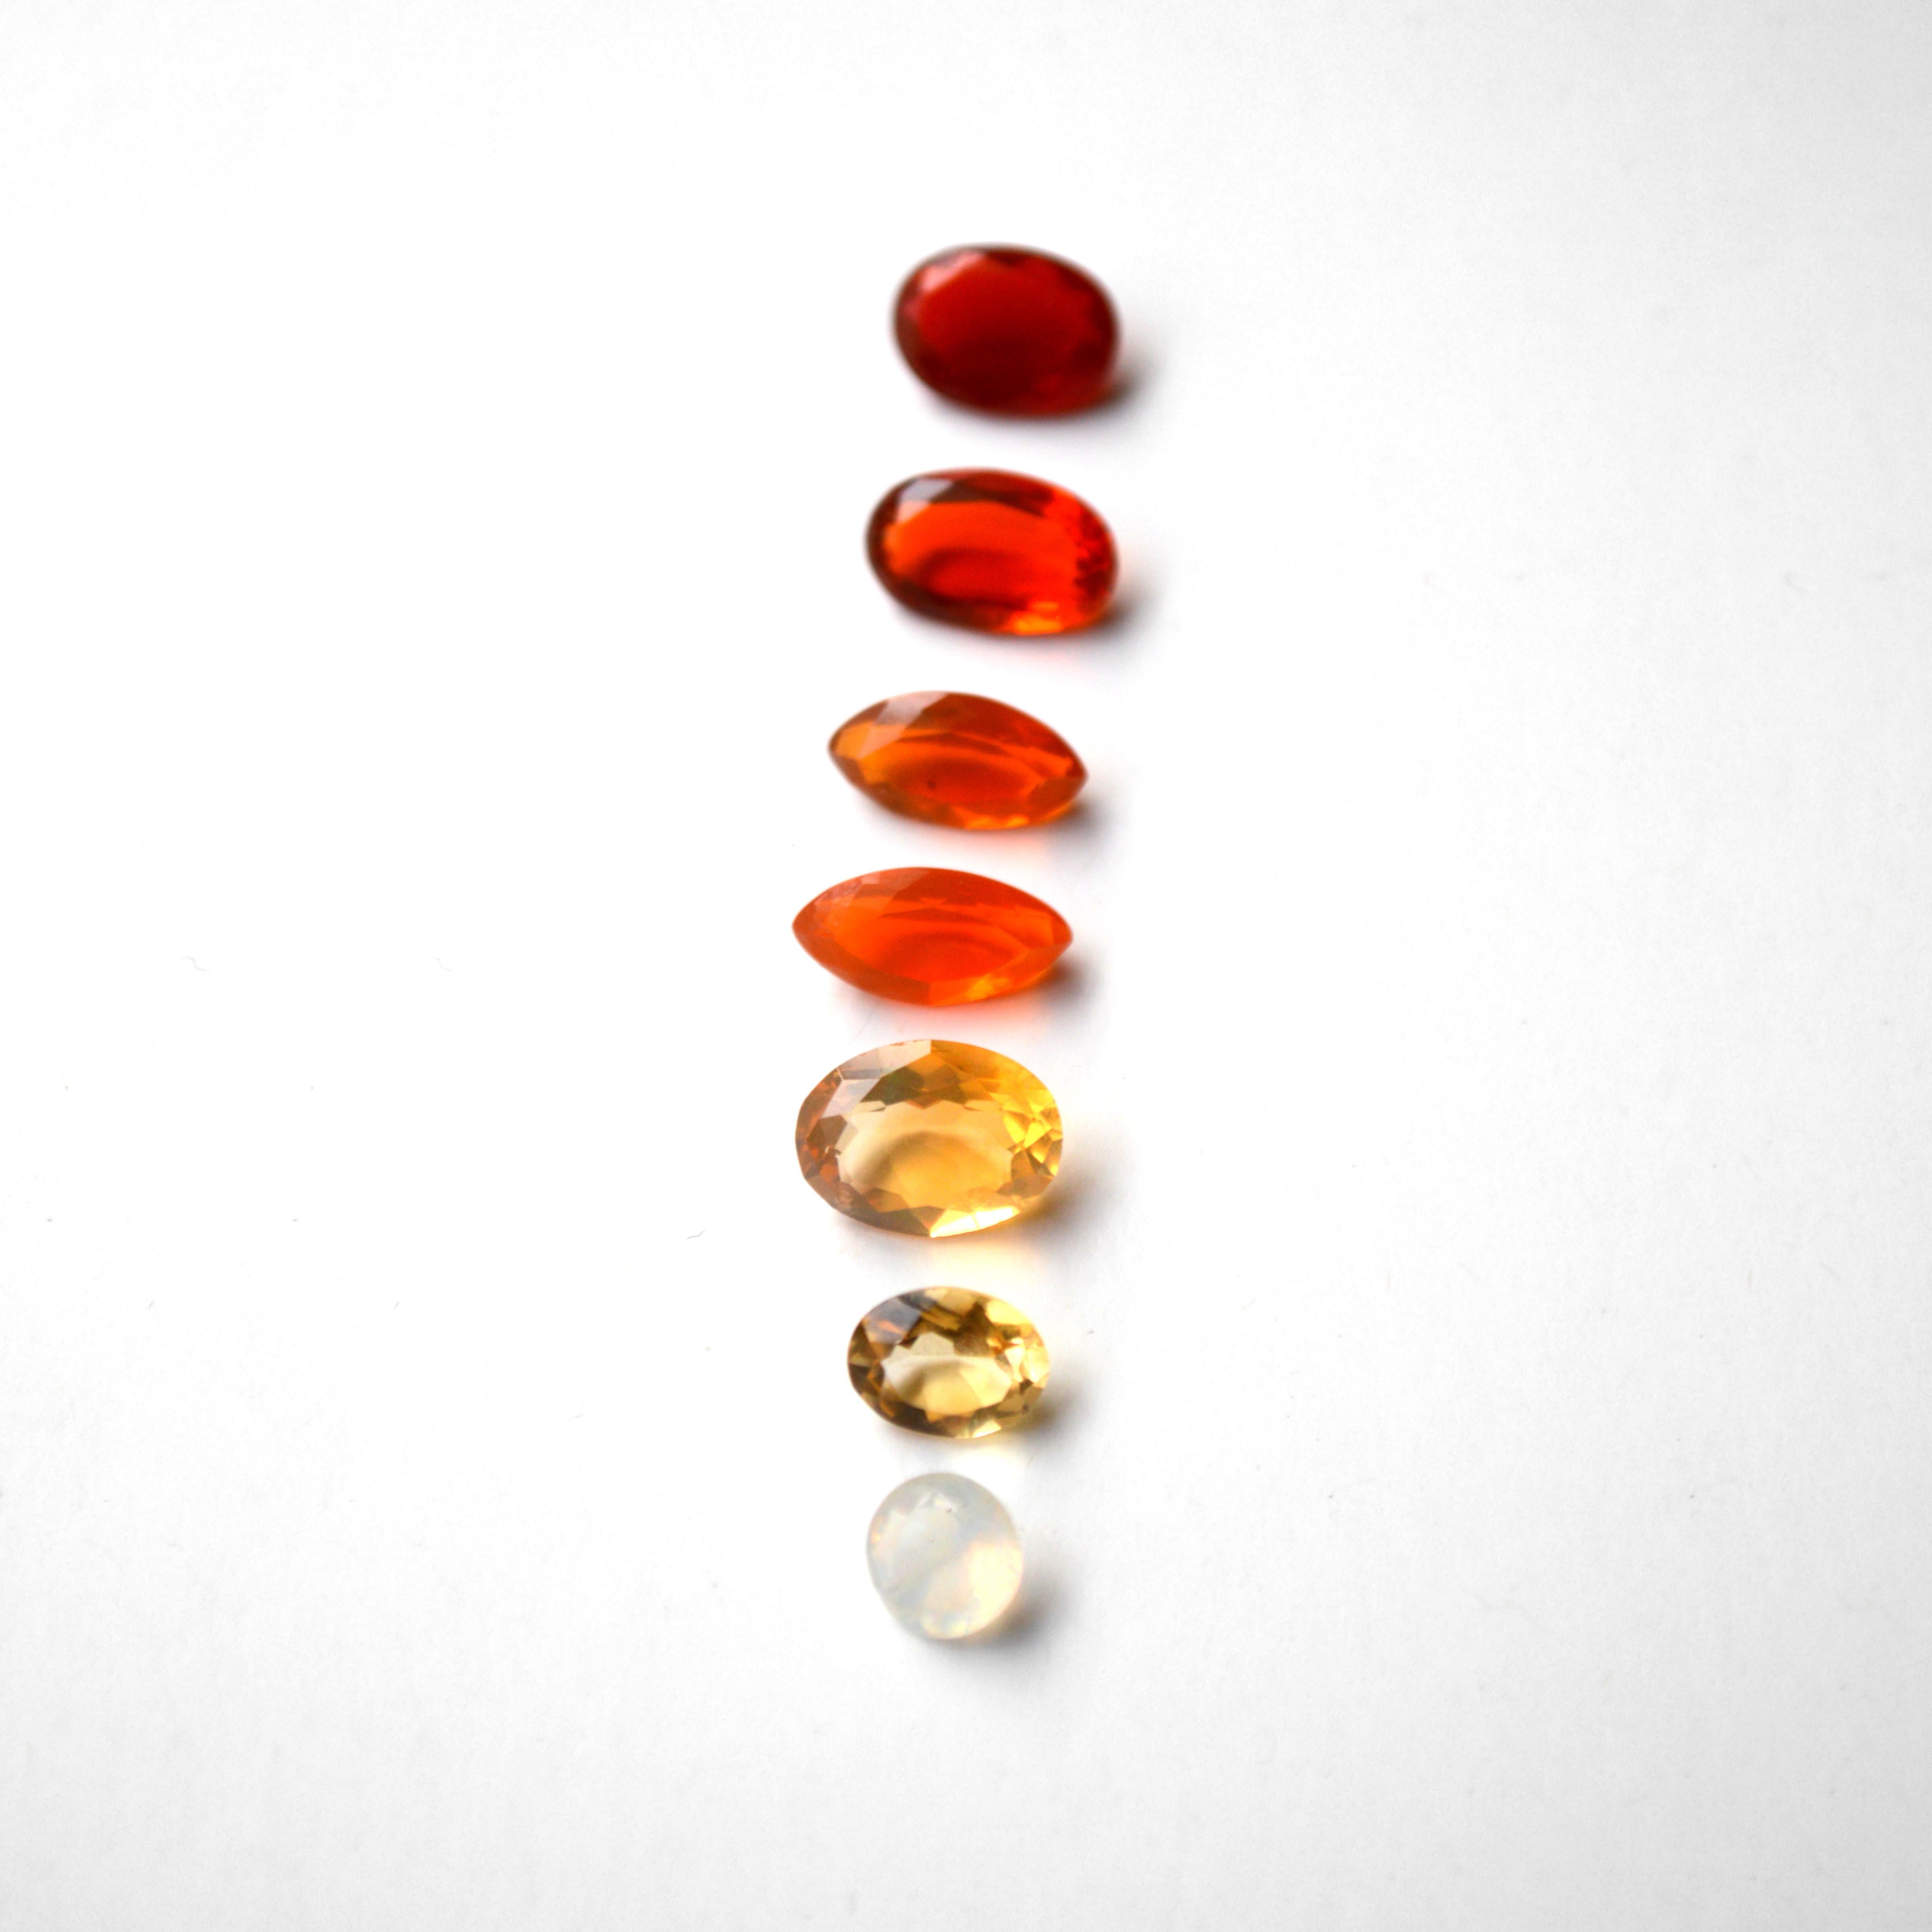 Lot of Loose Gemstones (7 pieces)
9.50 Carat in total 
Oval, marquise and brilliant cut stones
Fire Opal
Different colored opals, ranging from red, orange and yellow.

The biggest stone has the dimensions (yellow oval cut):
8.3 x 11 x 5.5 mm 
The